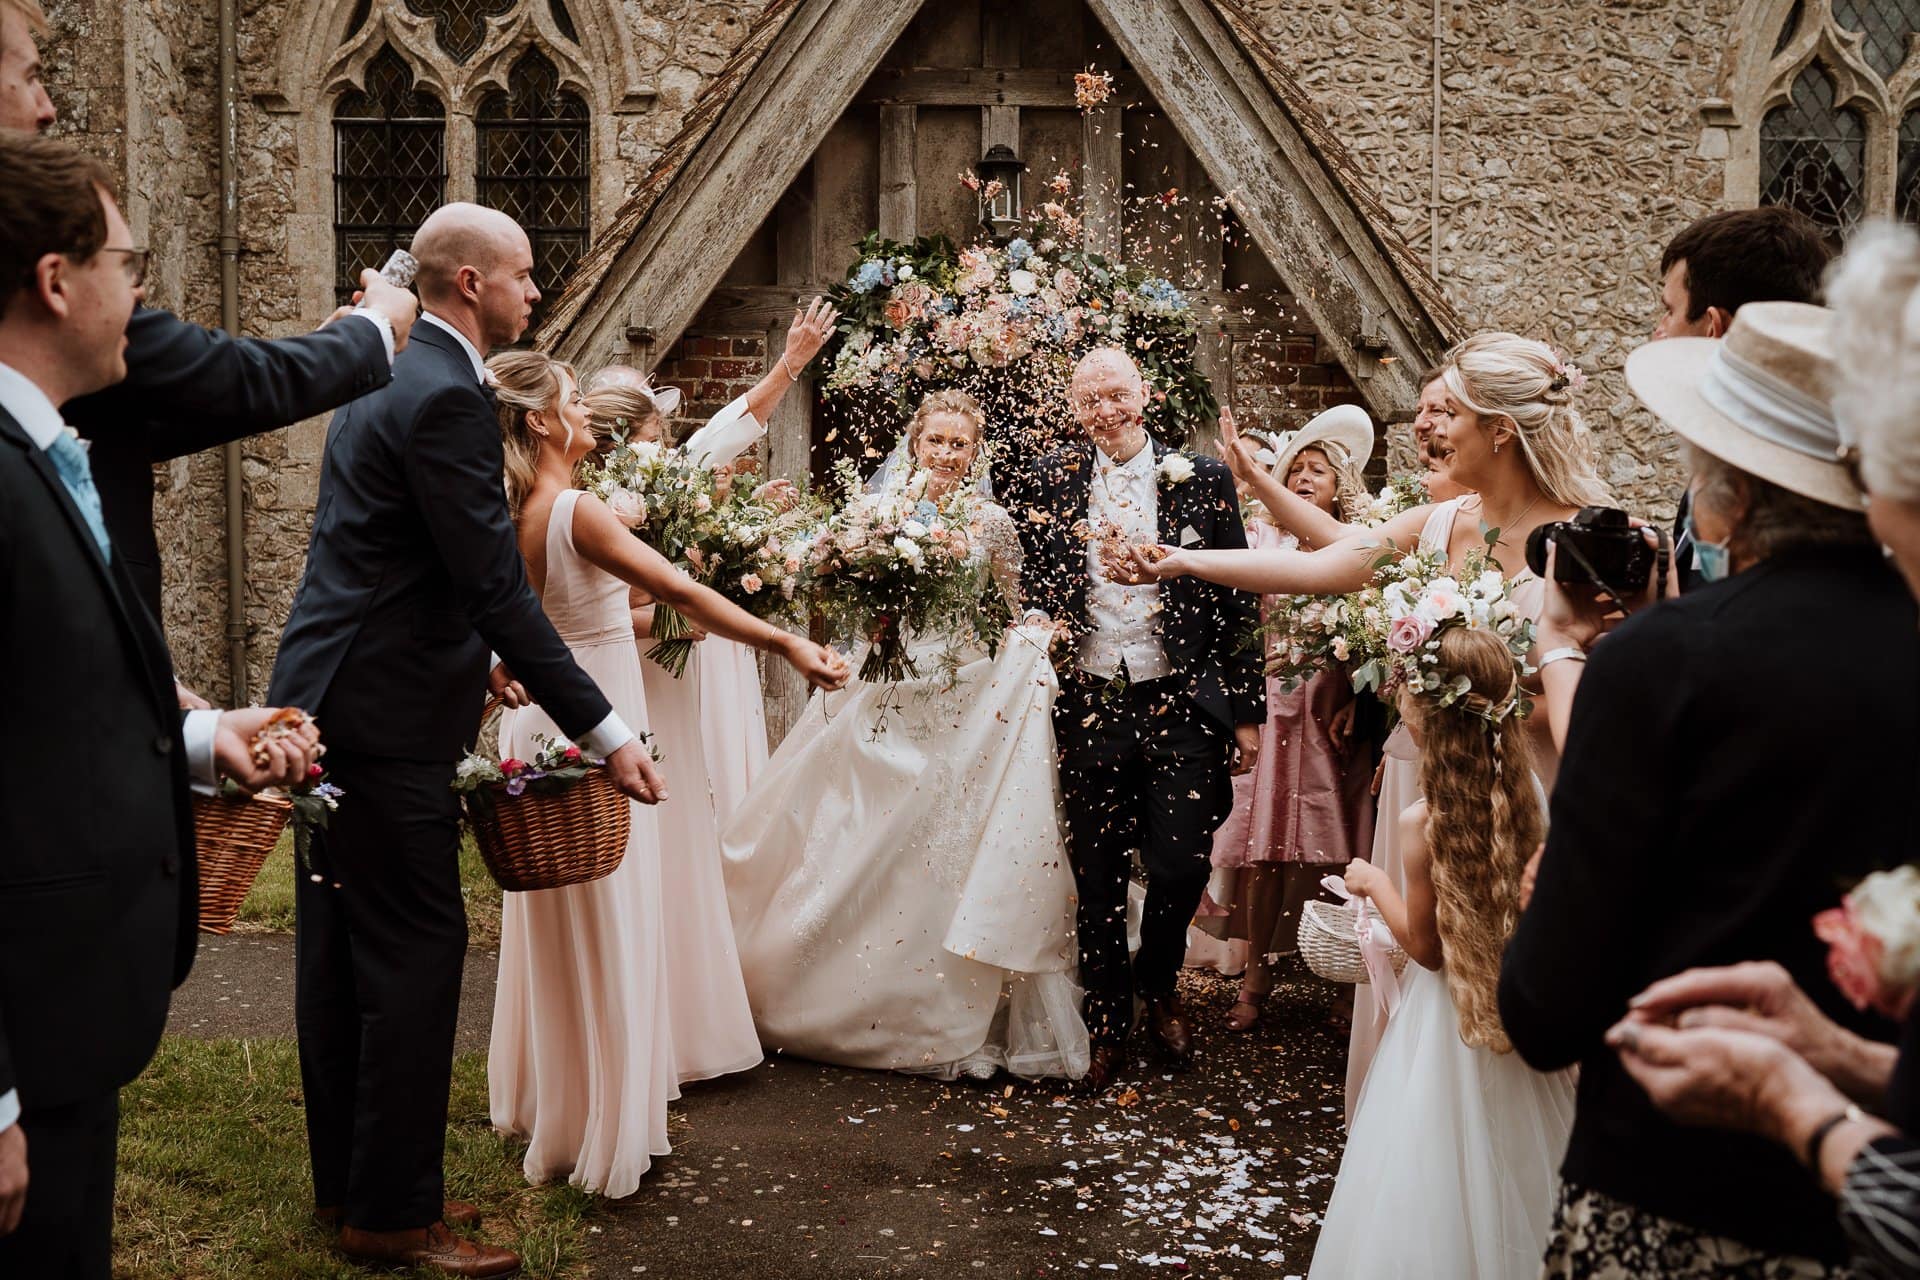 Bride and Groom being showered with confetti as they exit their church wedding ceremony